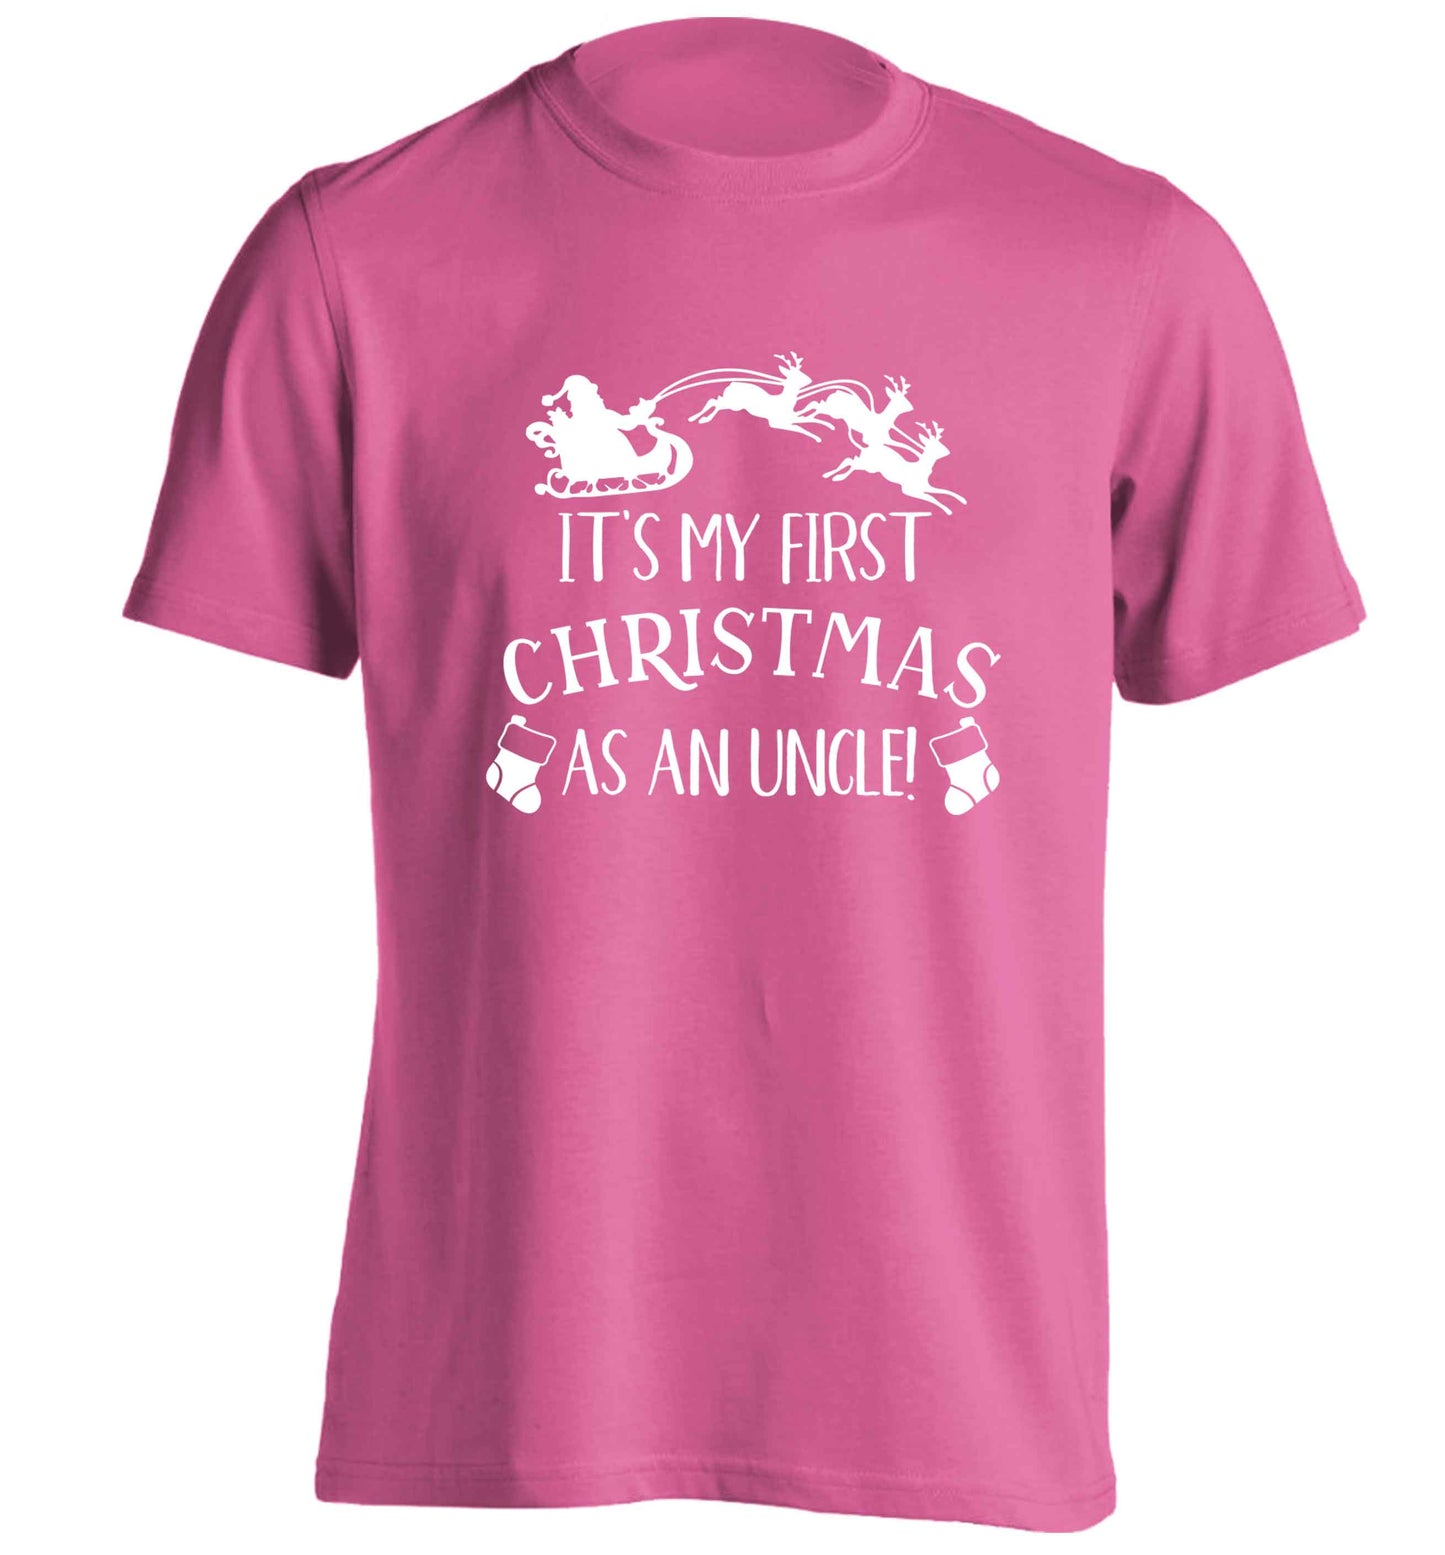 It's my first Christmas as an uncle! adults unisex pink Tshirt 2XL